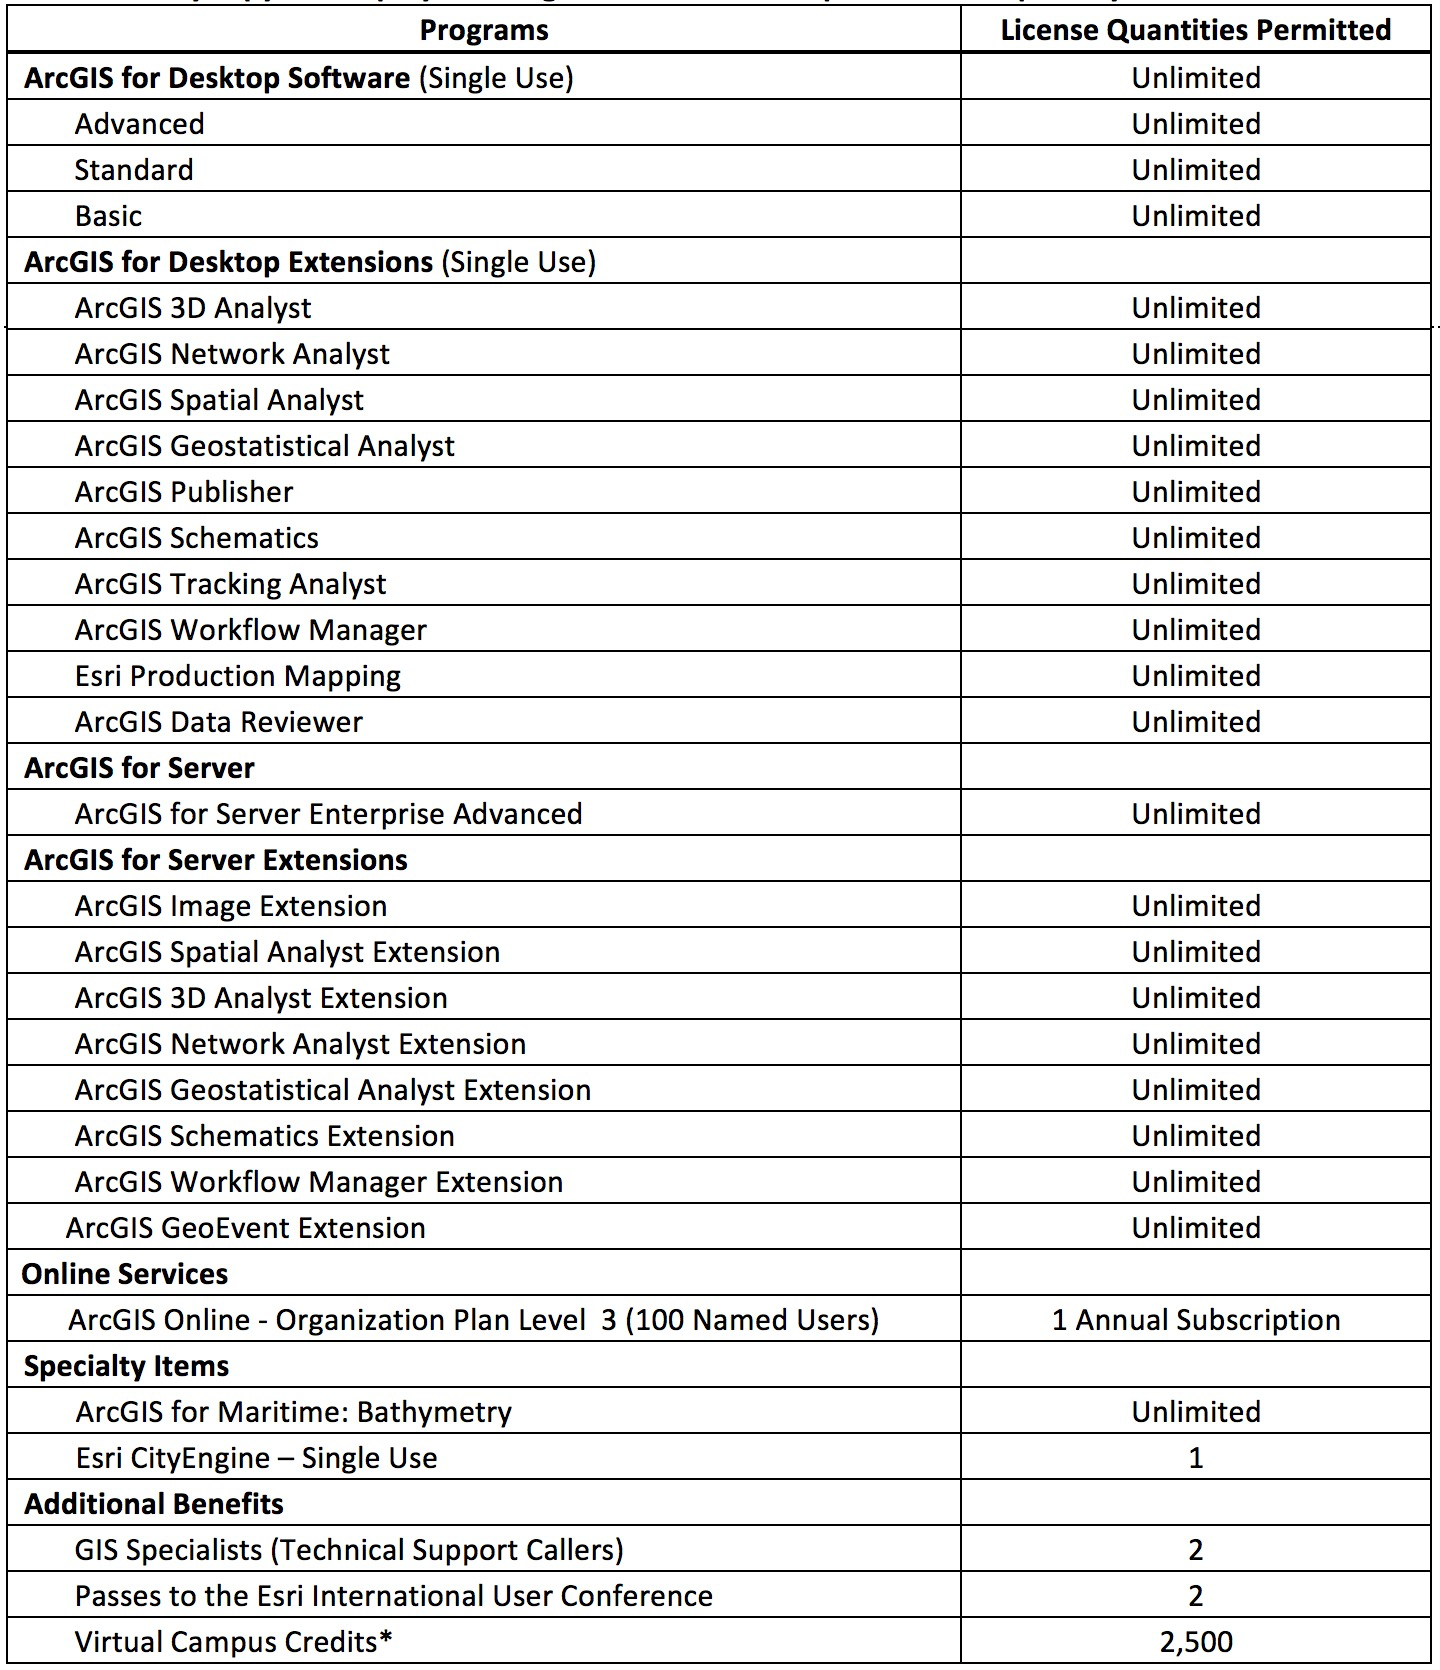 The list above is subject to change should Esri mitments to third parties regarding licensed third party technology included in Esri products prohibit or